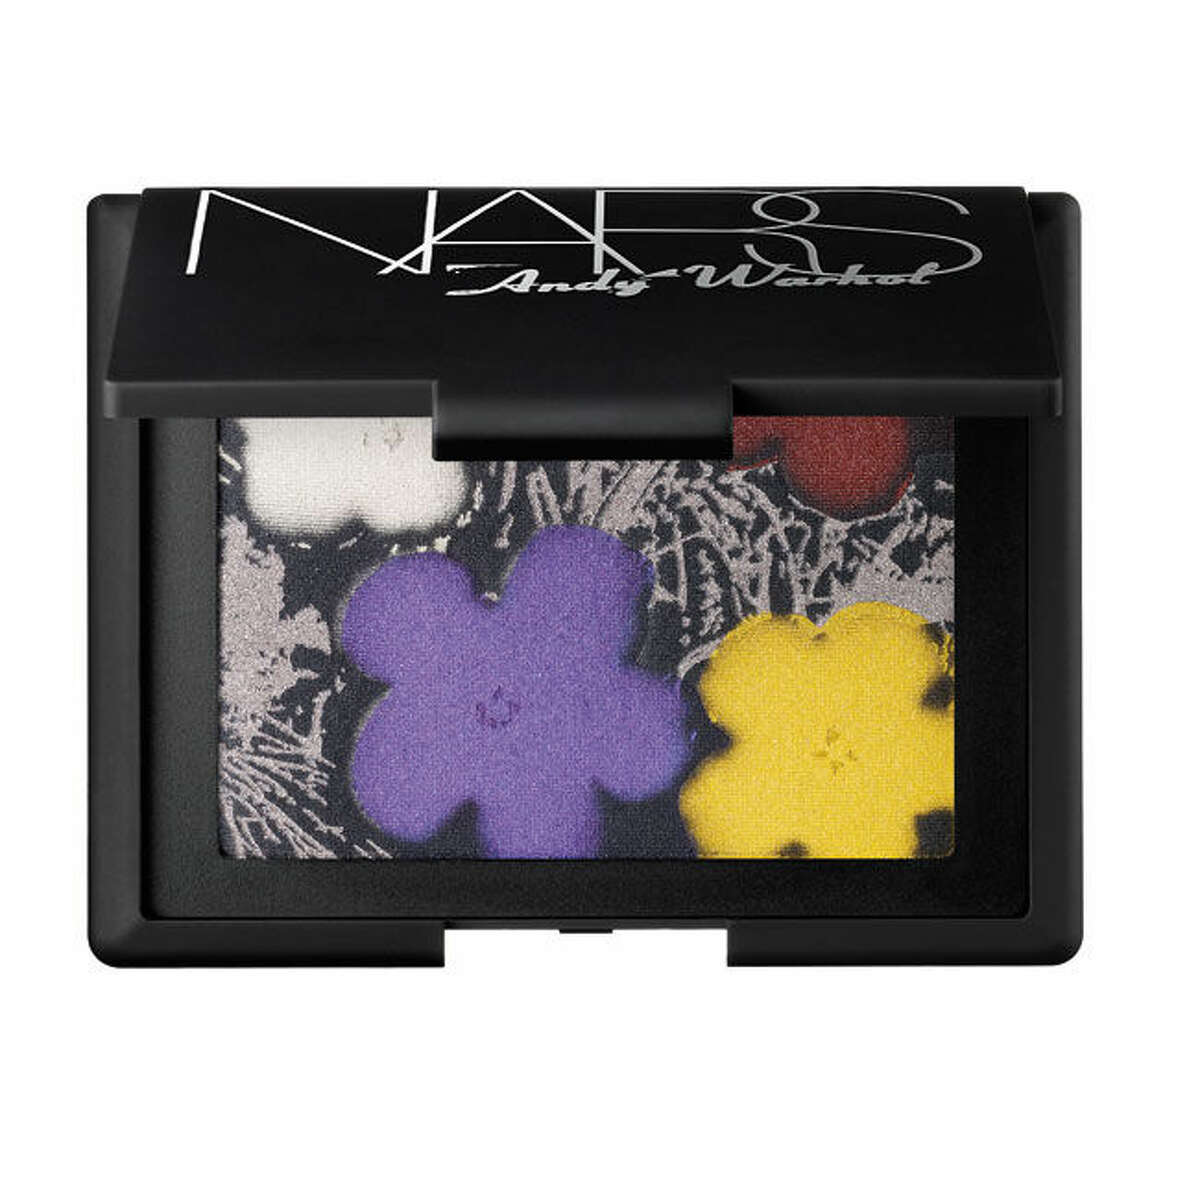 NARS Andy Warhol "Flowers" eye-shadow palette, $55, at Sephora, Danbury Fair Mall, and other locations